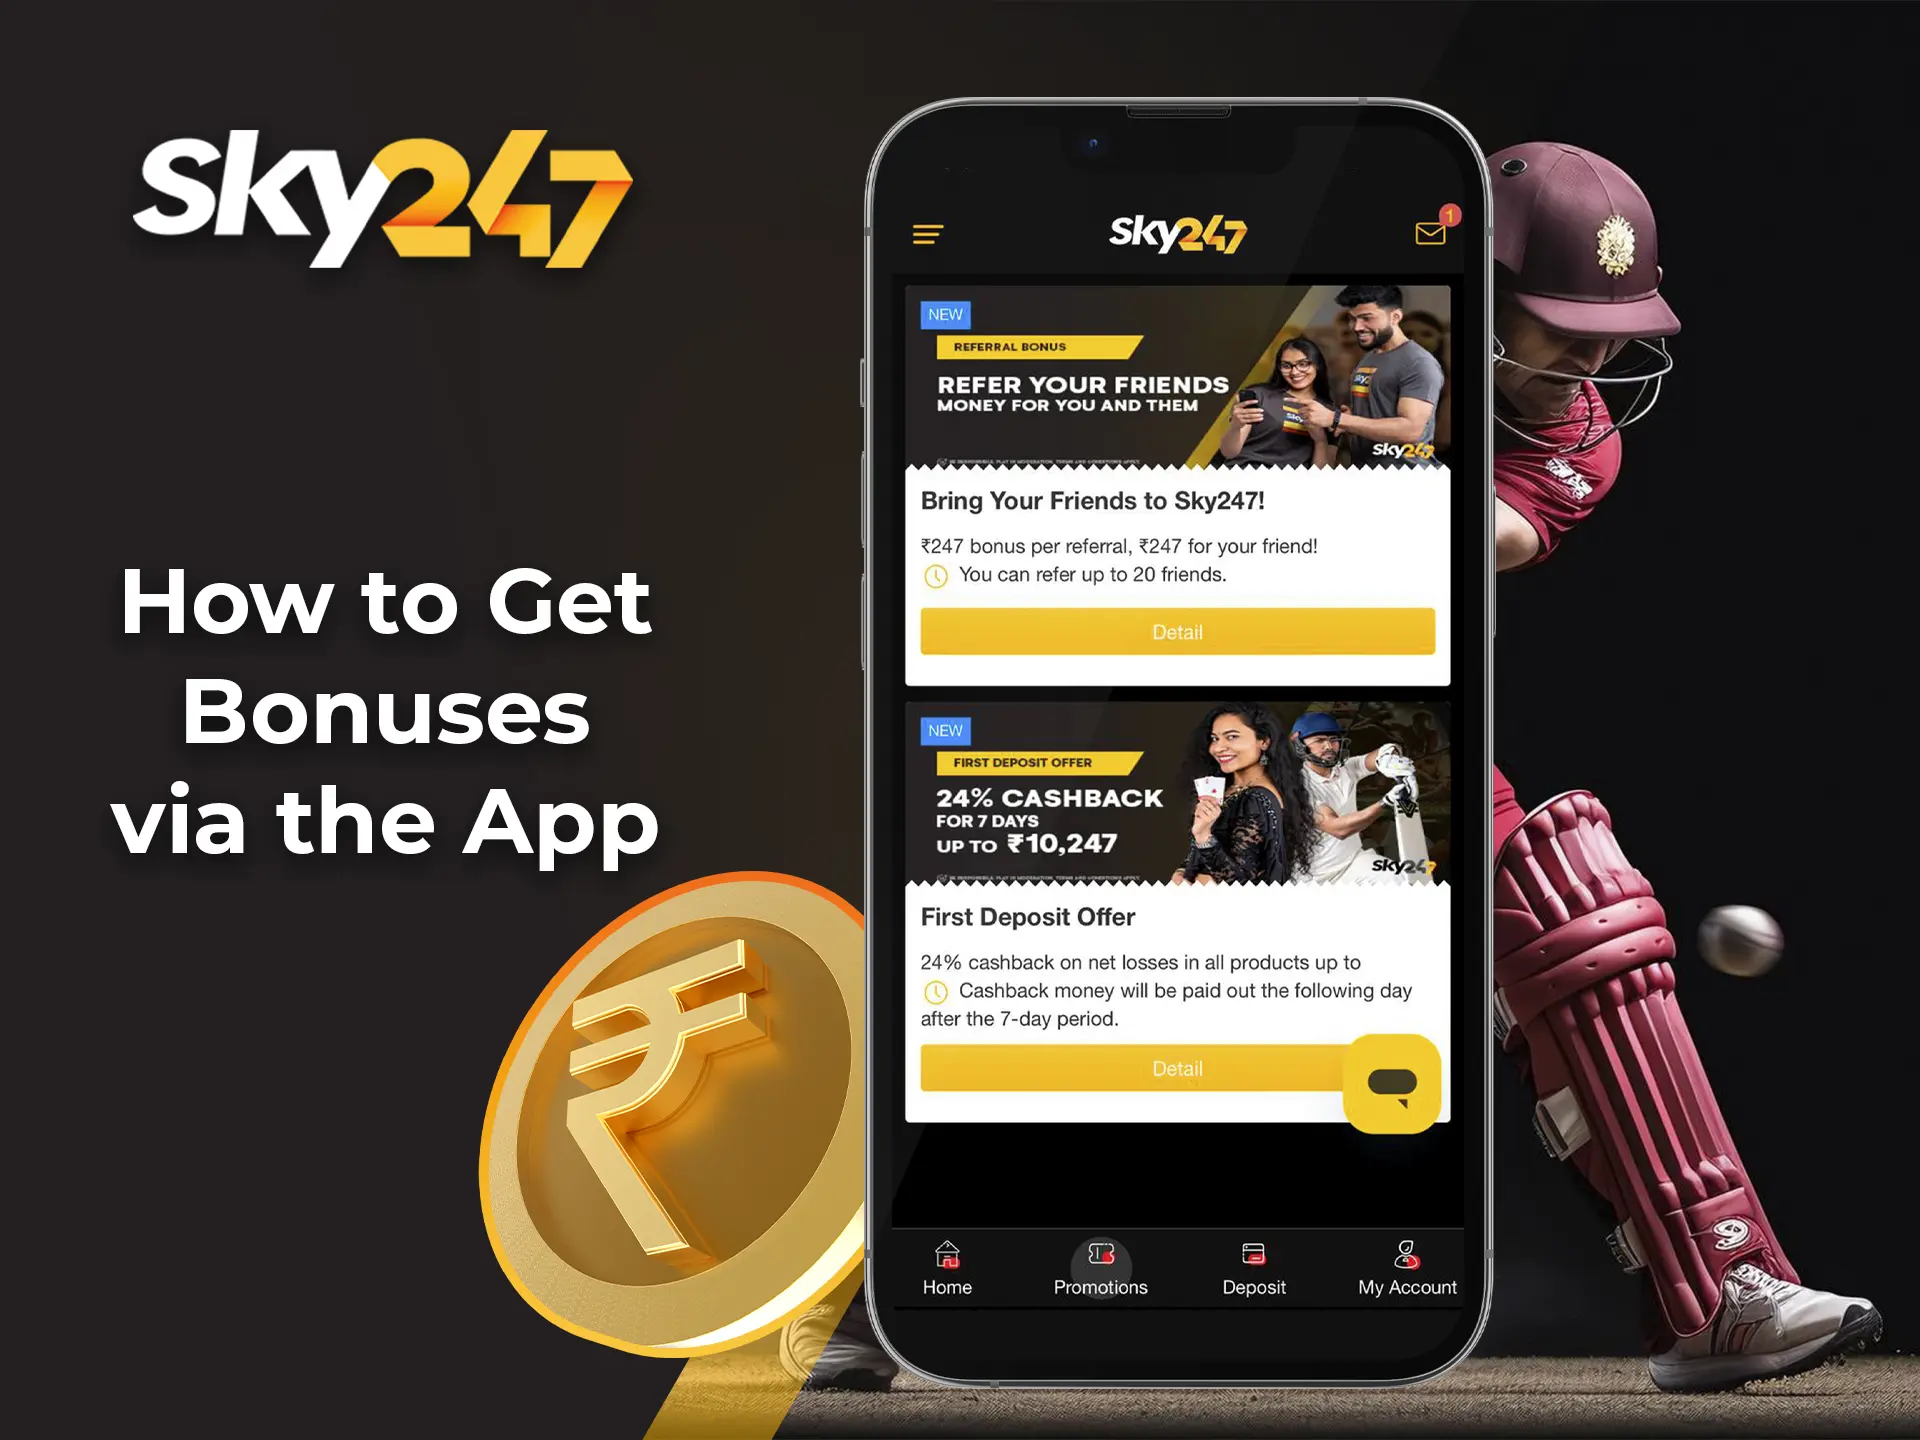 Sign up to claim your long-awaited and coveted bonus from Sky247.